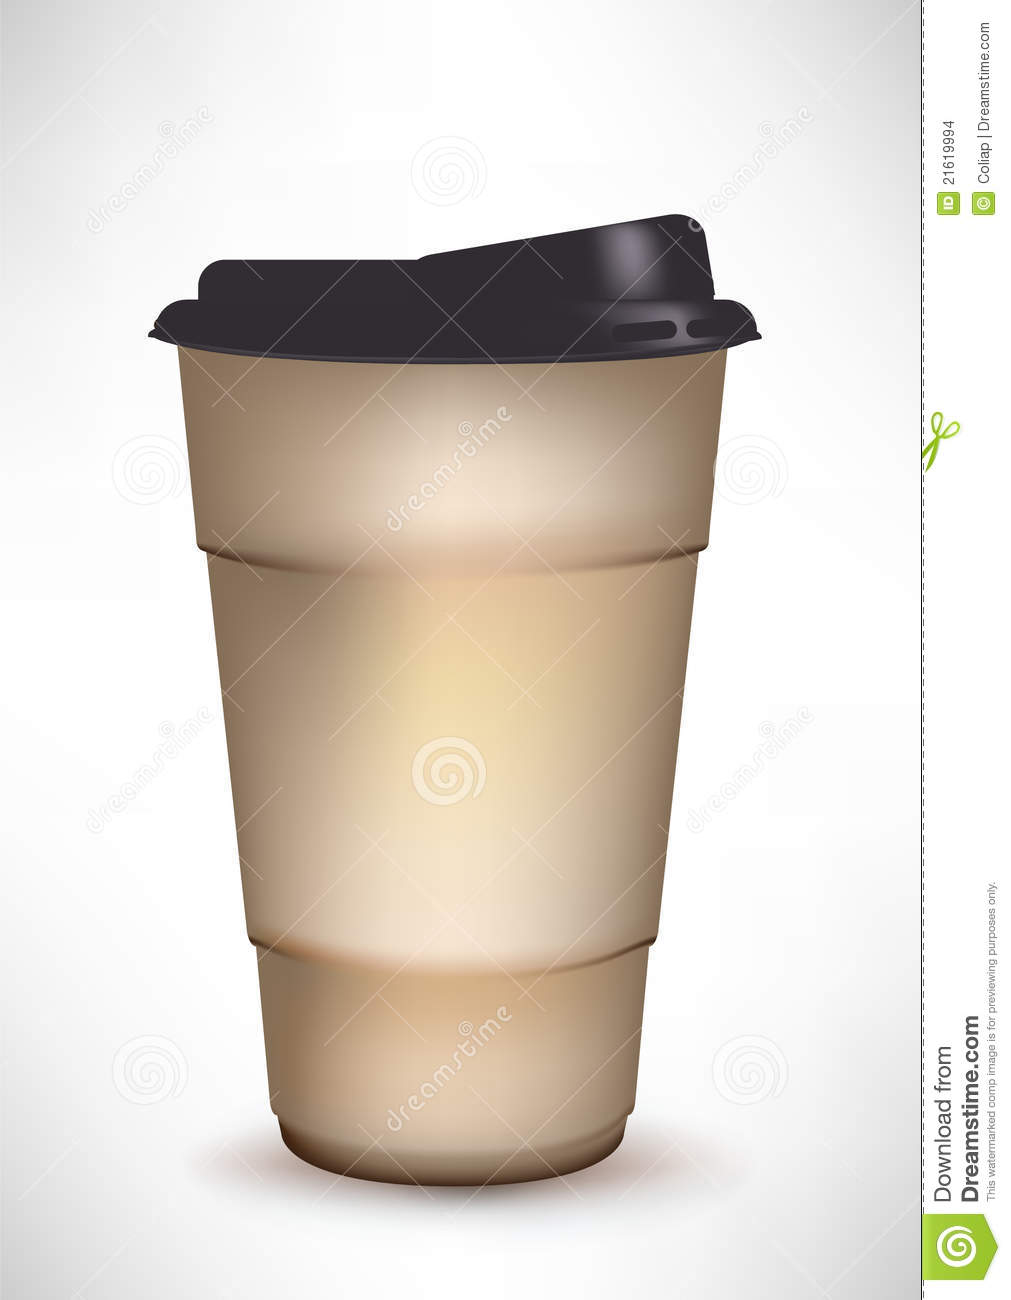 Coffee Container With Cap Stock Images   Image  21619994